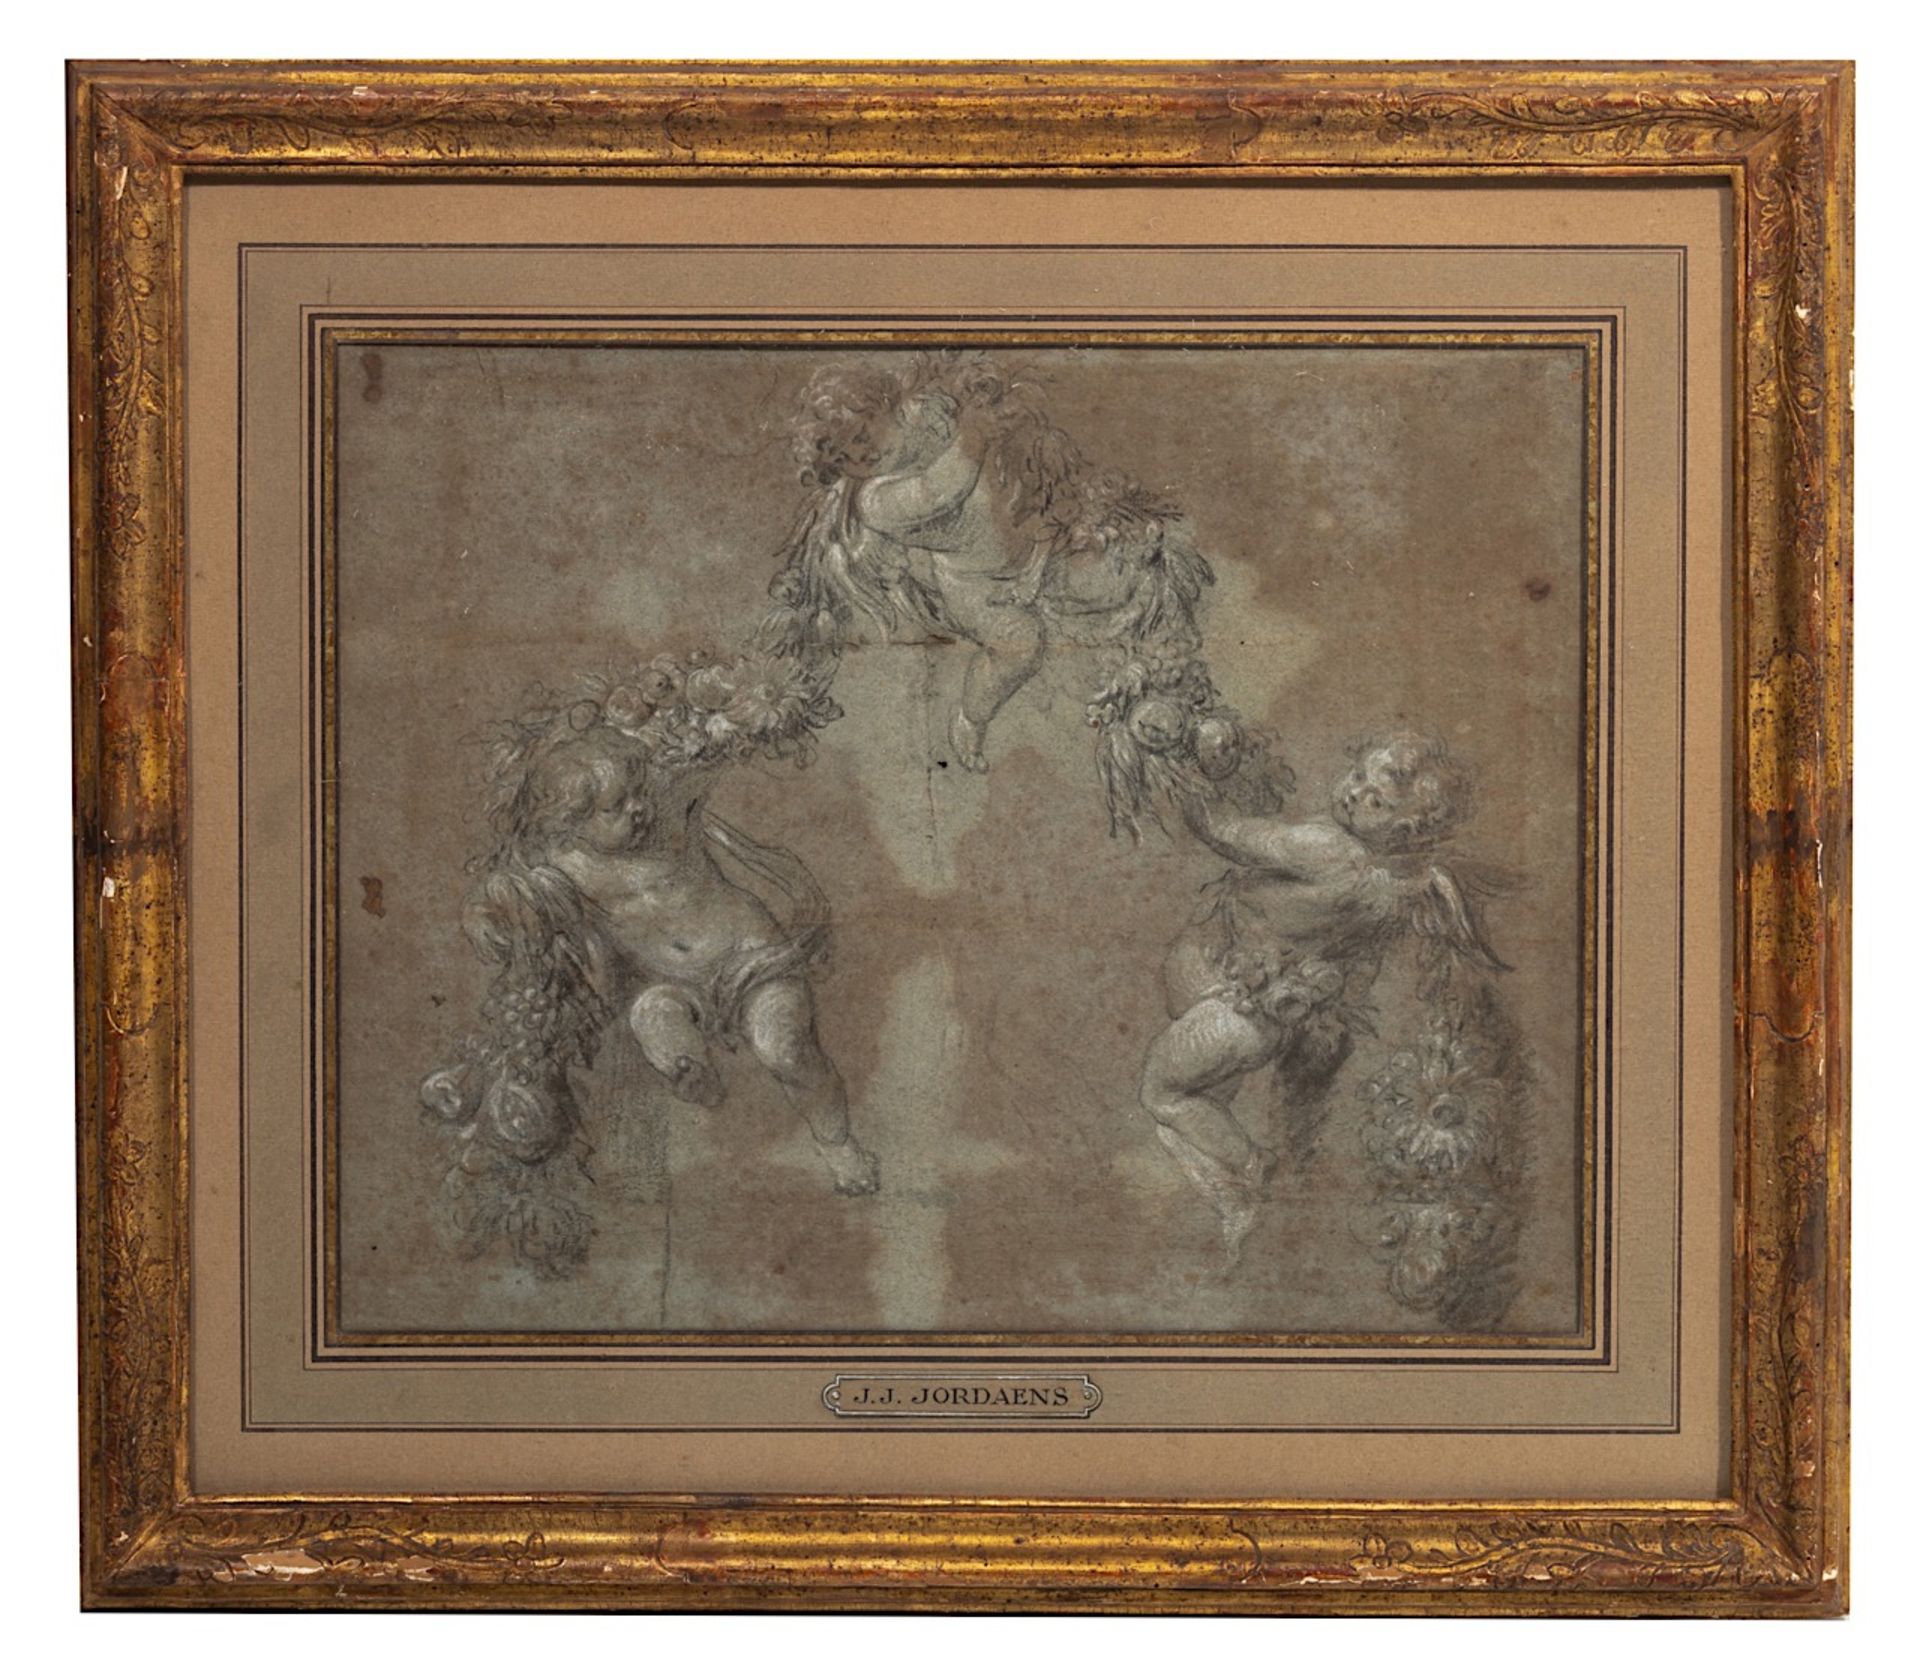 Attrib. to or circle of Jacob Jordaens (1593-1678), study of putti presenting a flower garland, char - Image 2 of 3